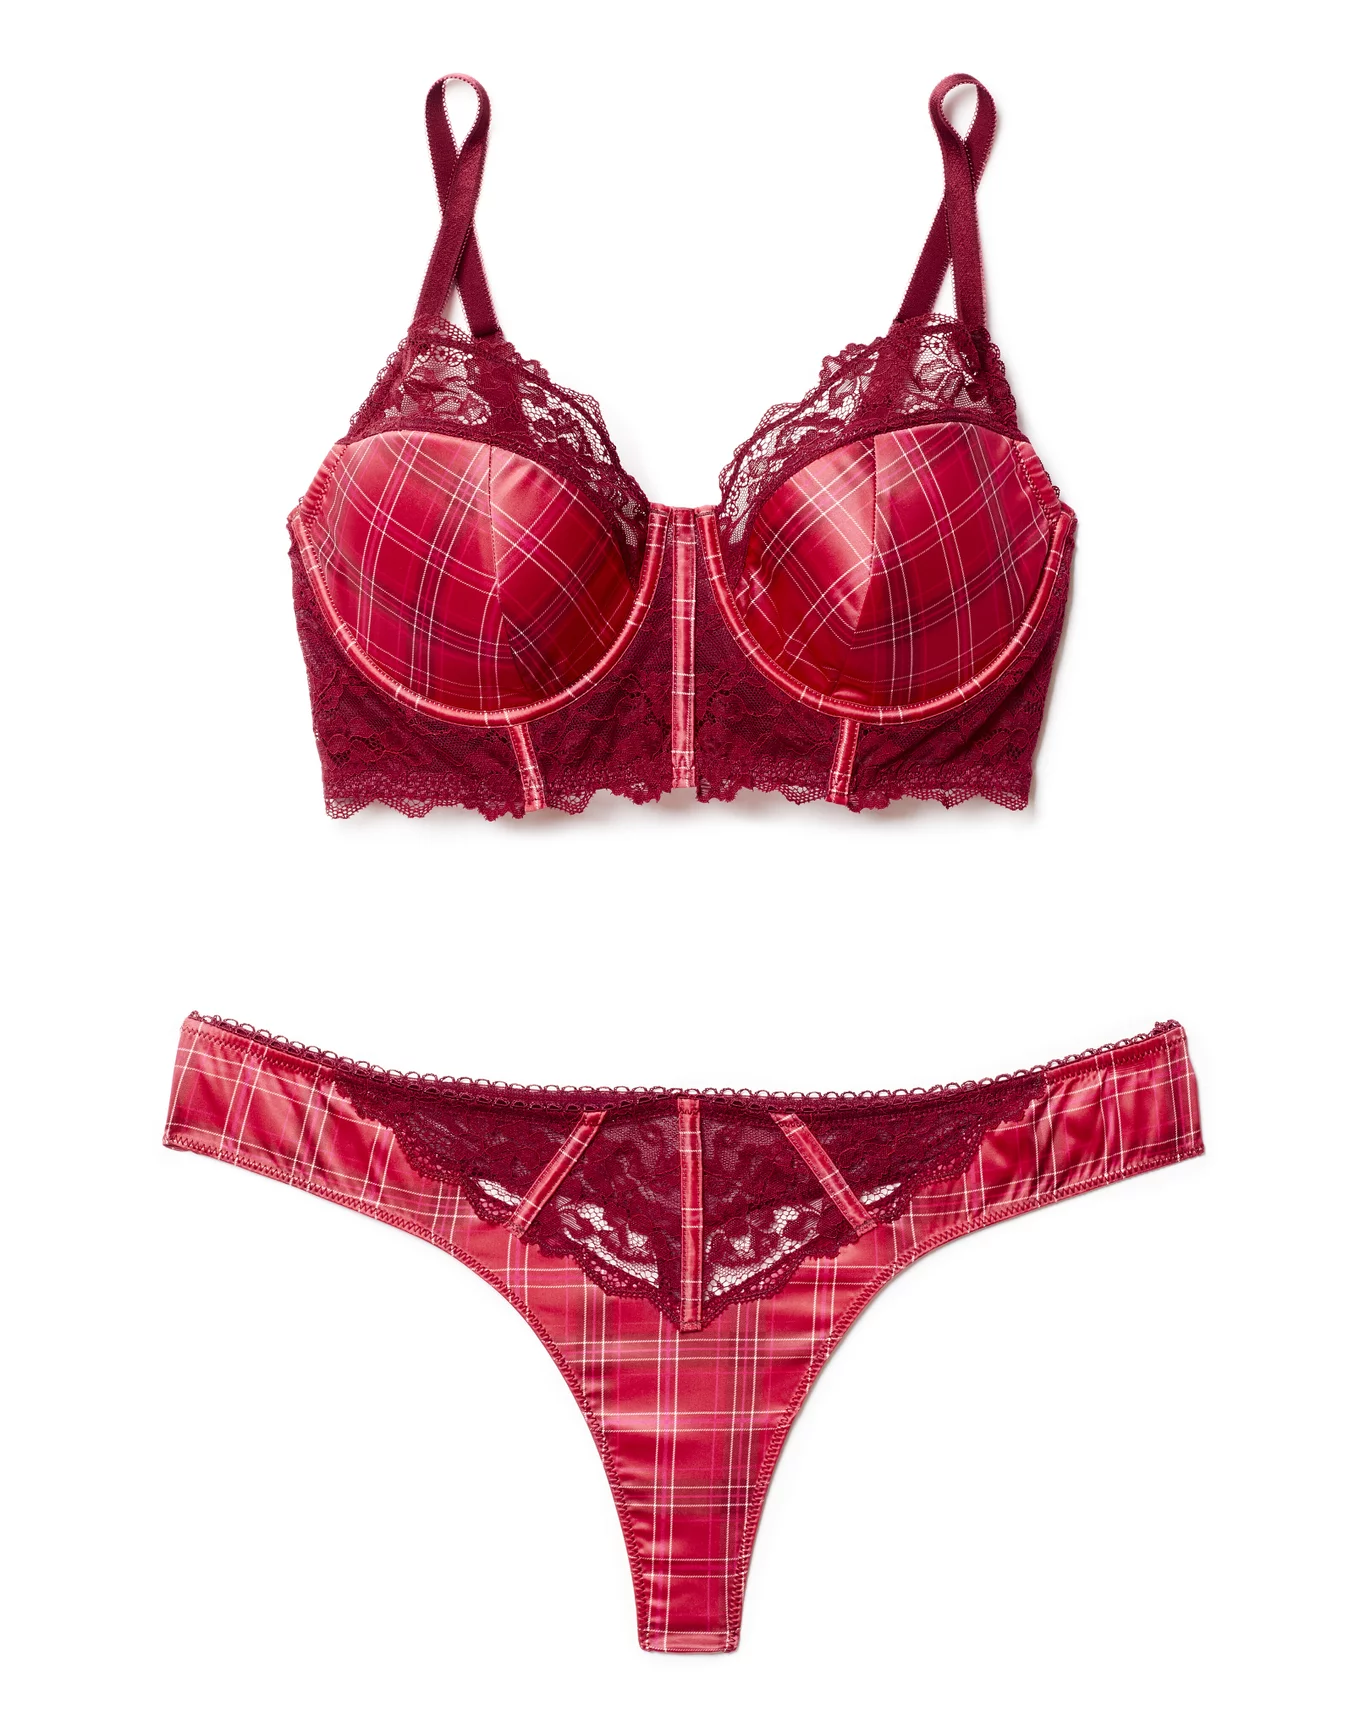 Buy B&B Comfort Women's Red Embroidered Lingerie Set-42A Online at